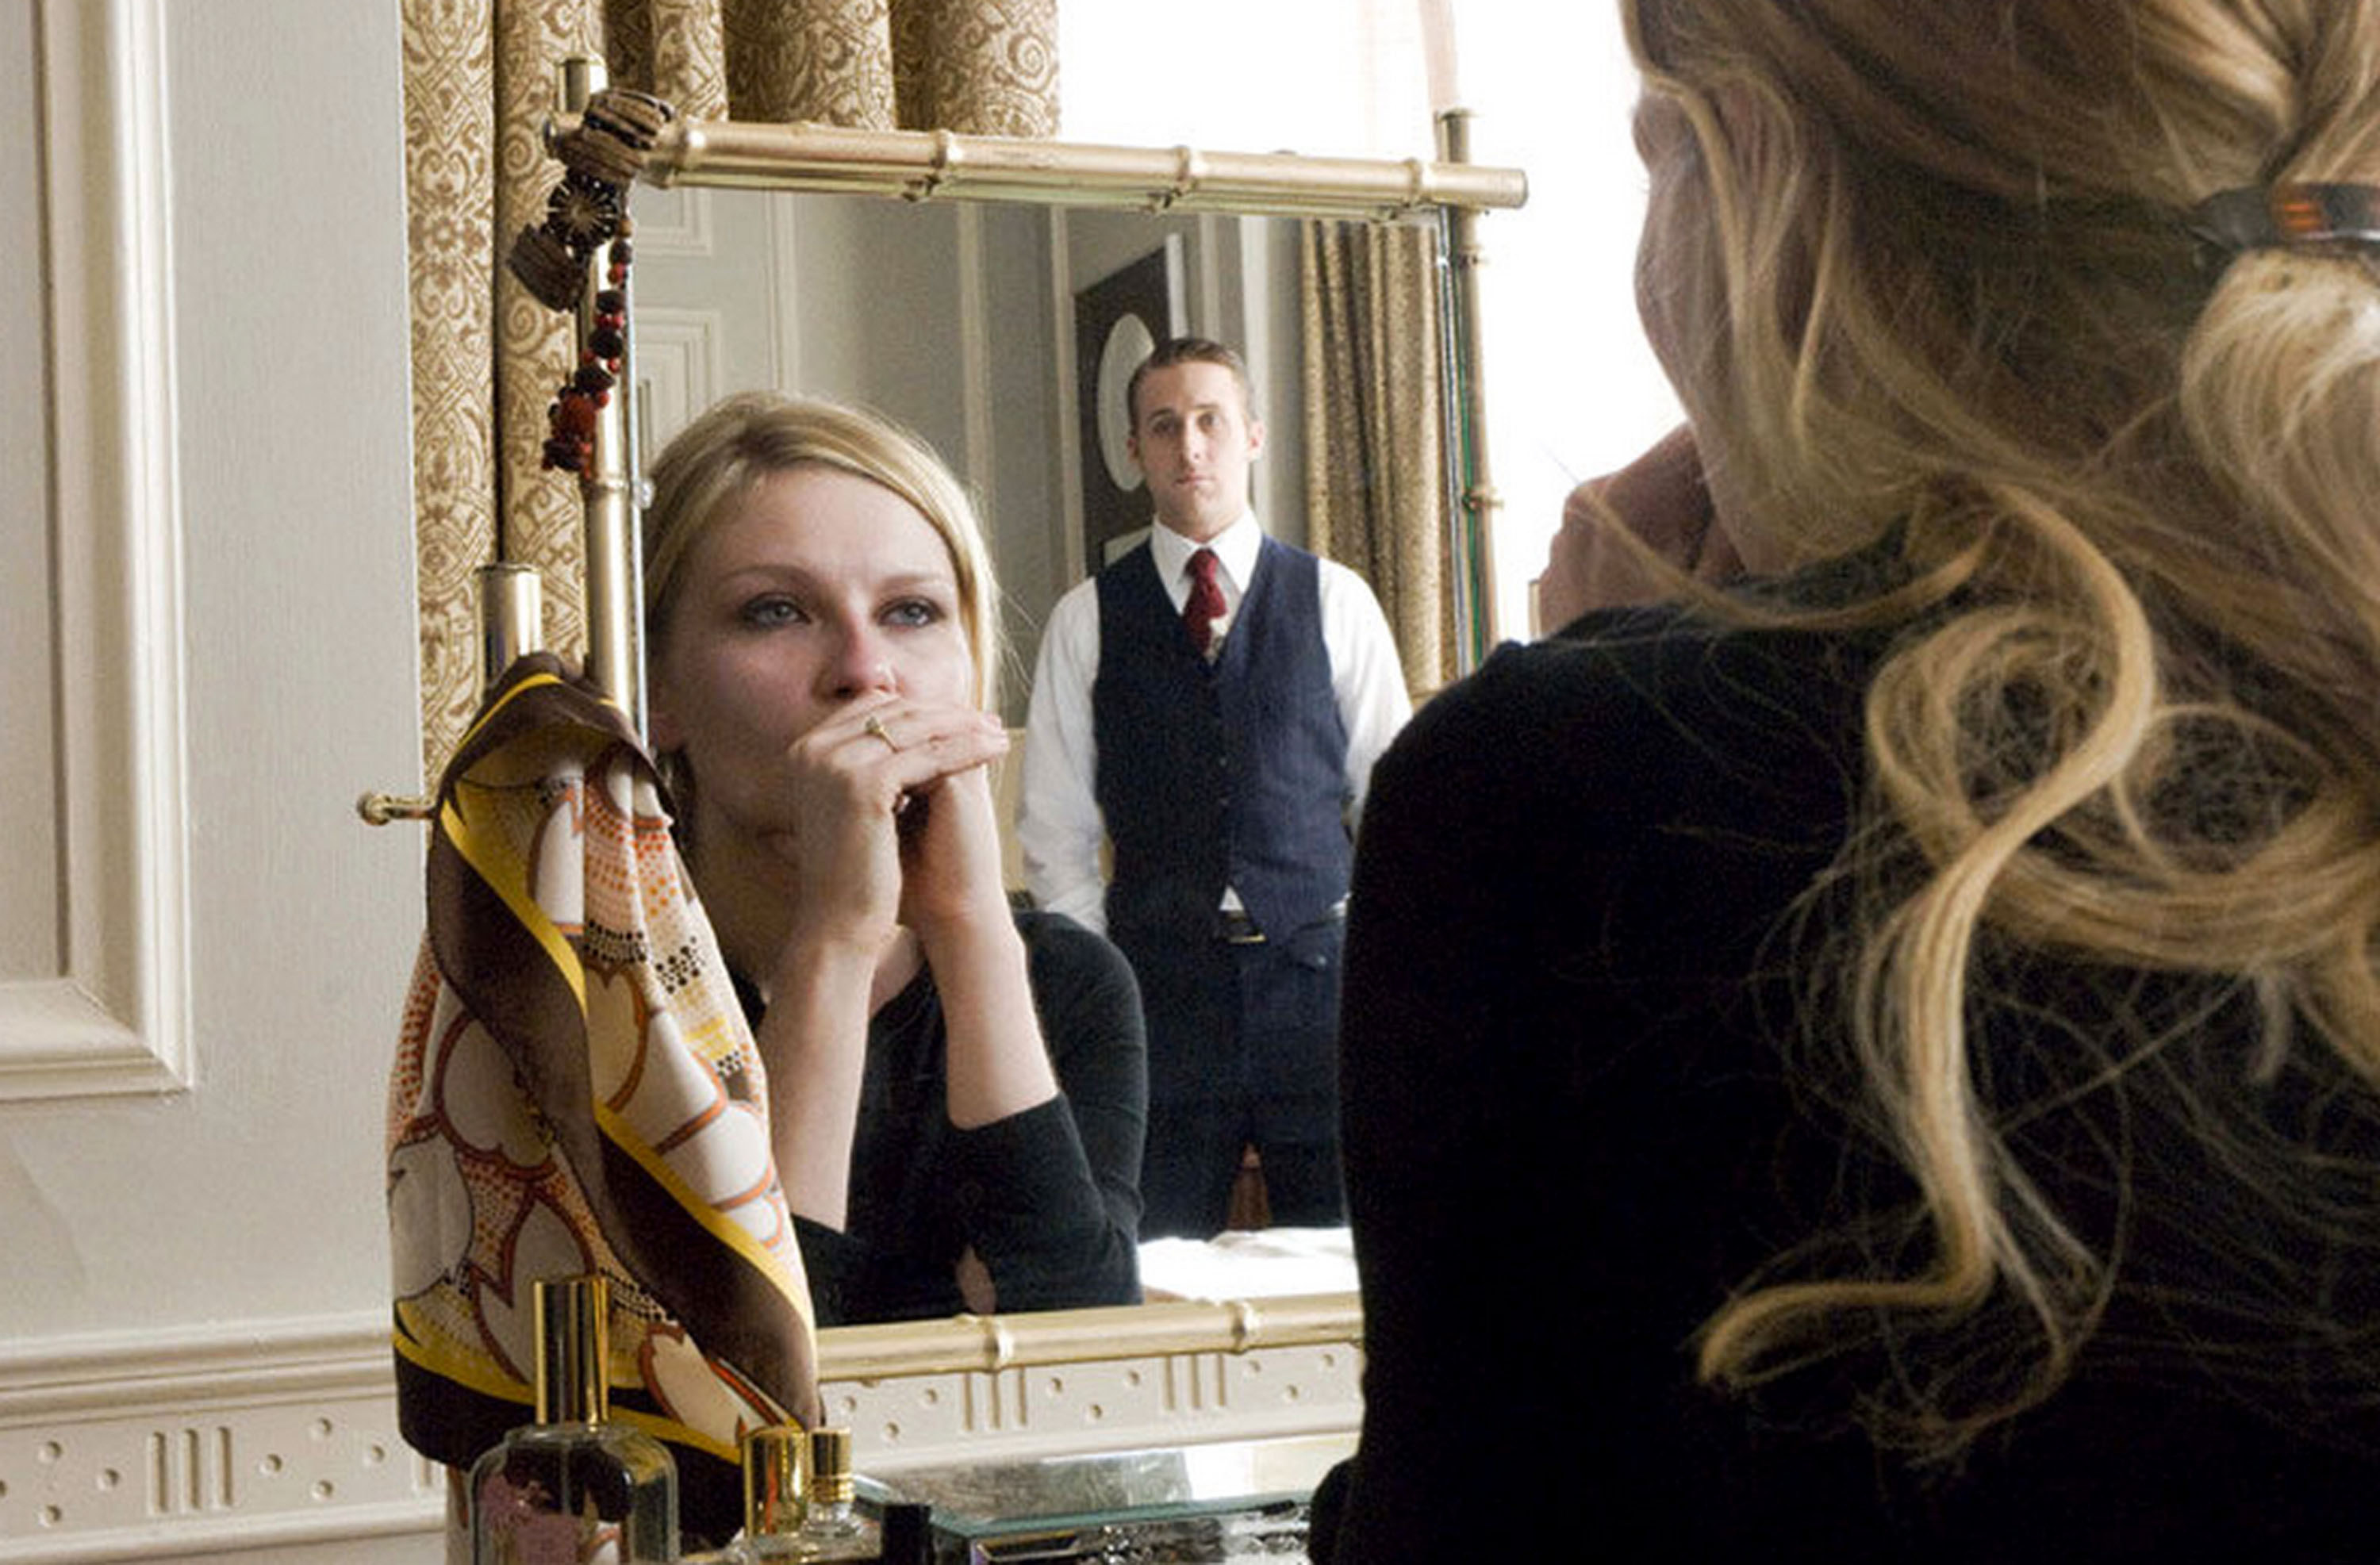 A man stares coldly at a blonde woman near her mirror